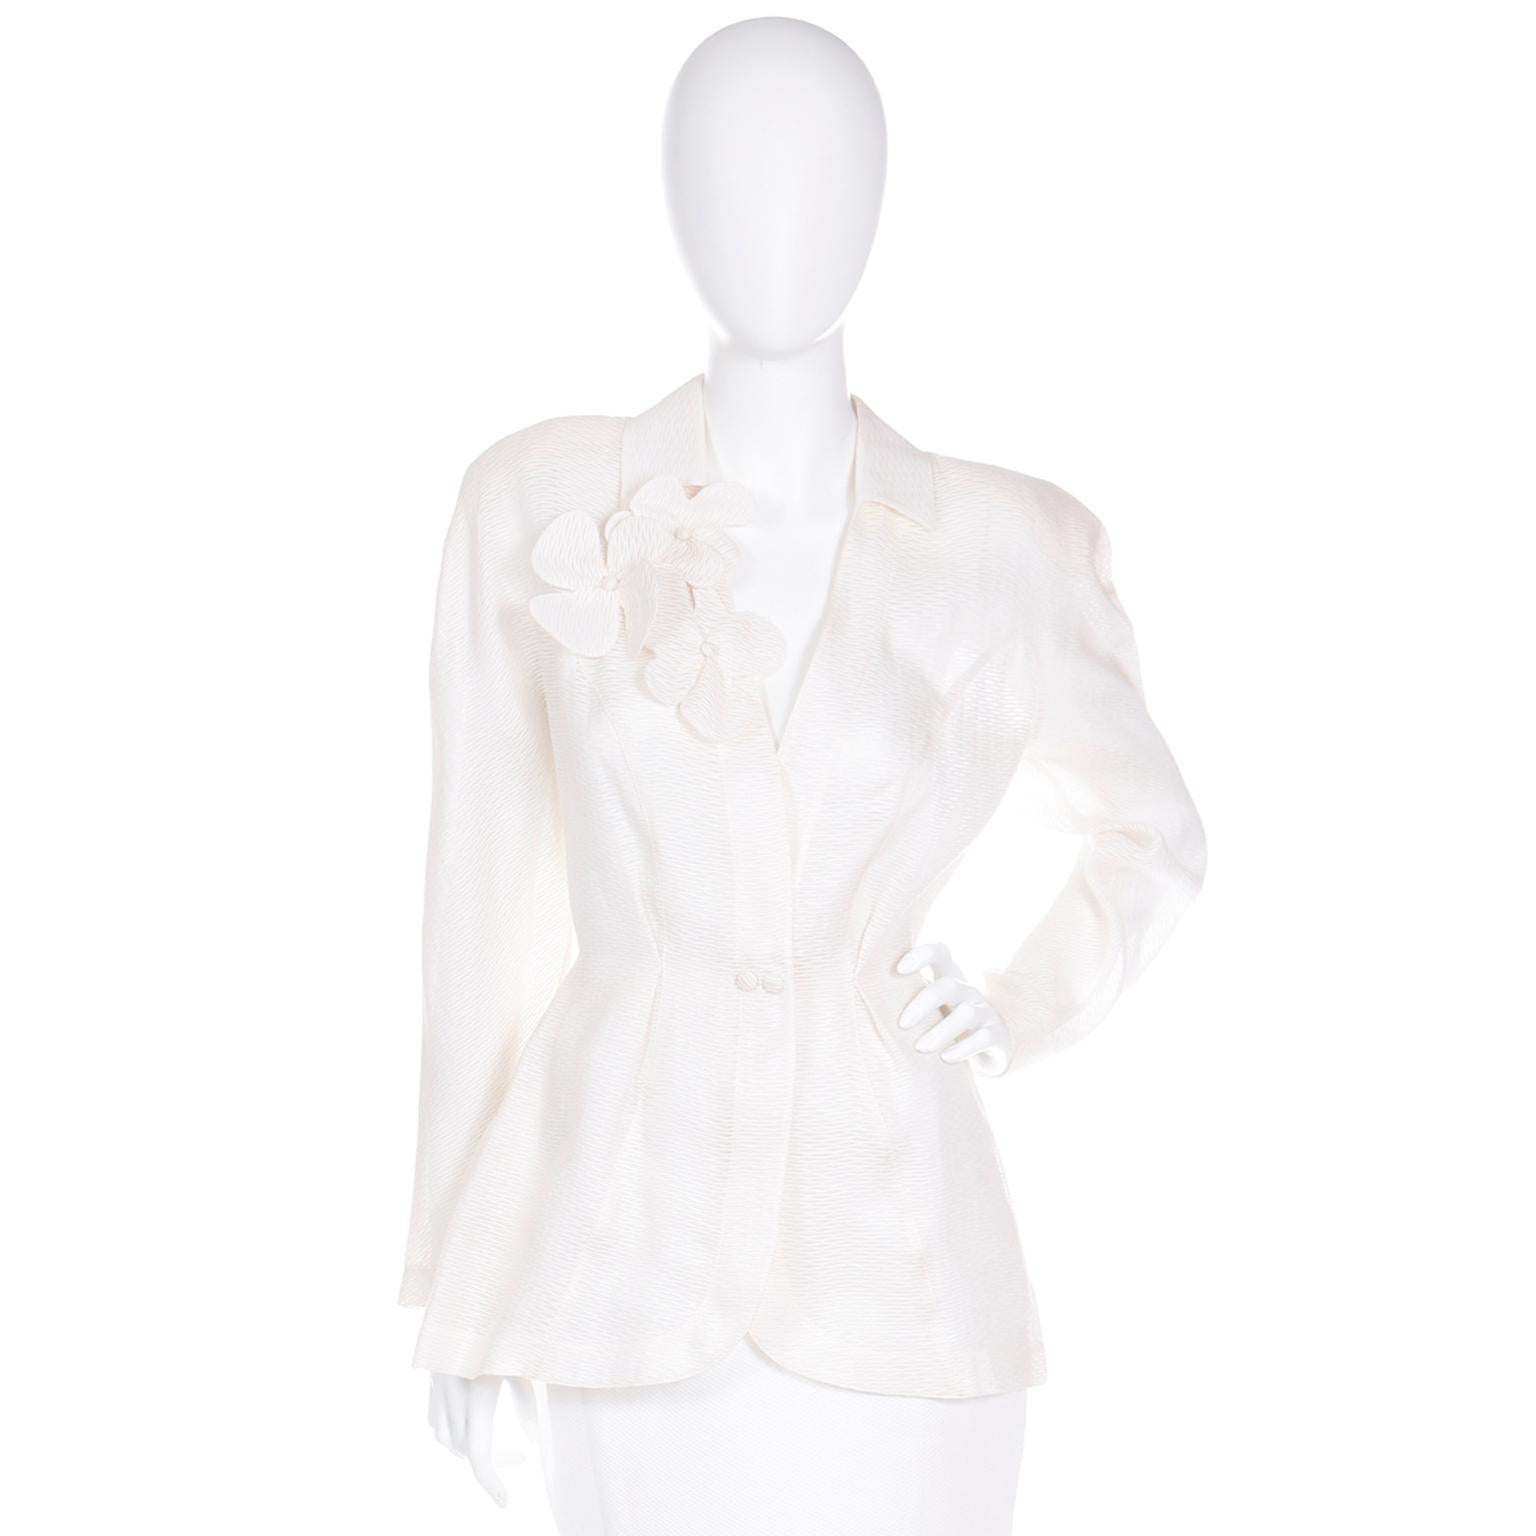 We love Thierry Mugler and we fell in love with this incredible ivory silk and cotton blend jacket the minute we saw it! This deadstock jacket has the signature Mugler structured silhouette and it closes with a center snap closure at the waist. The